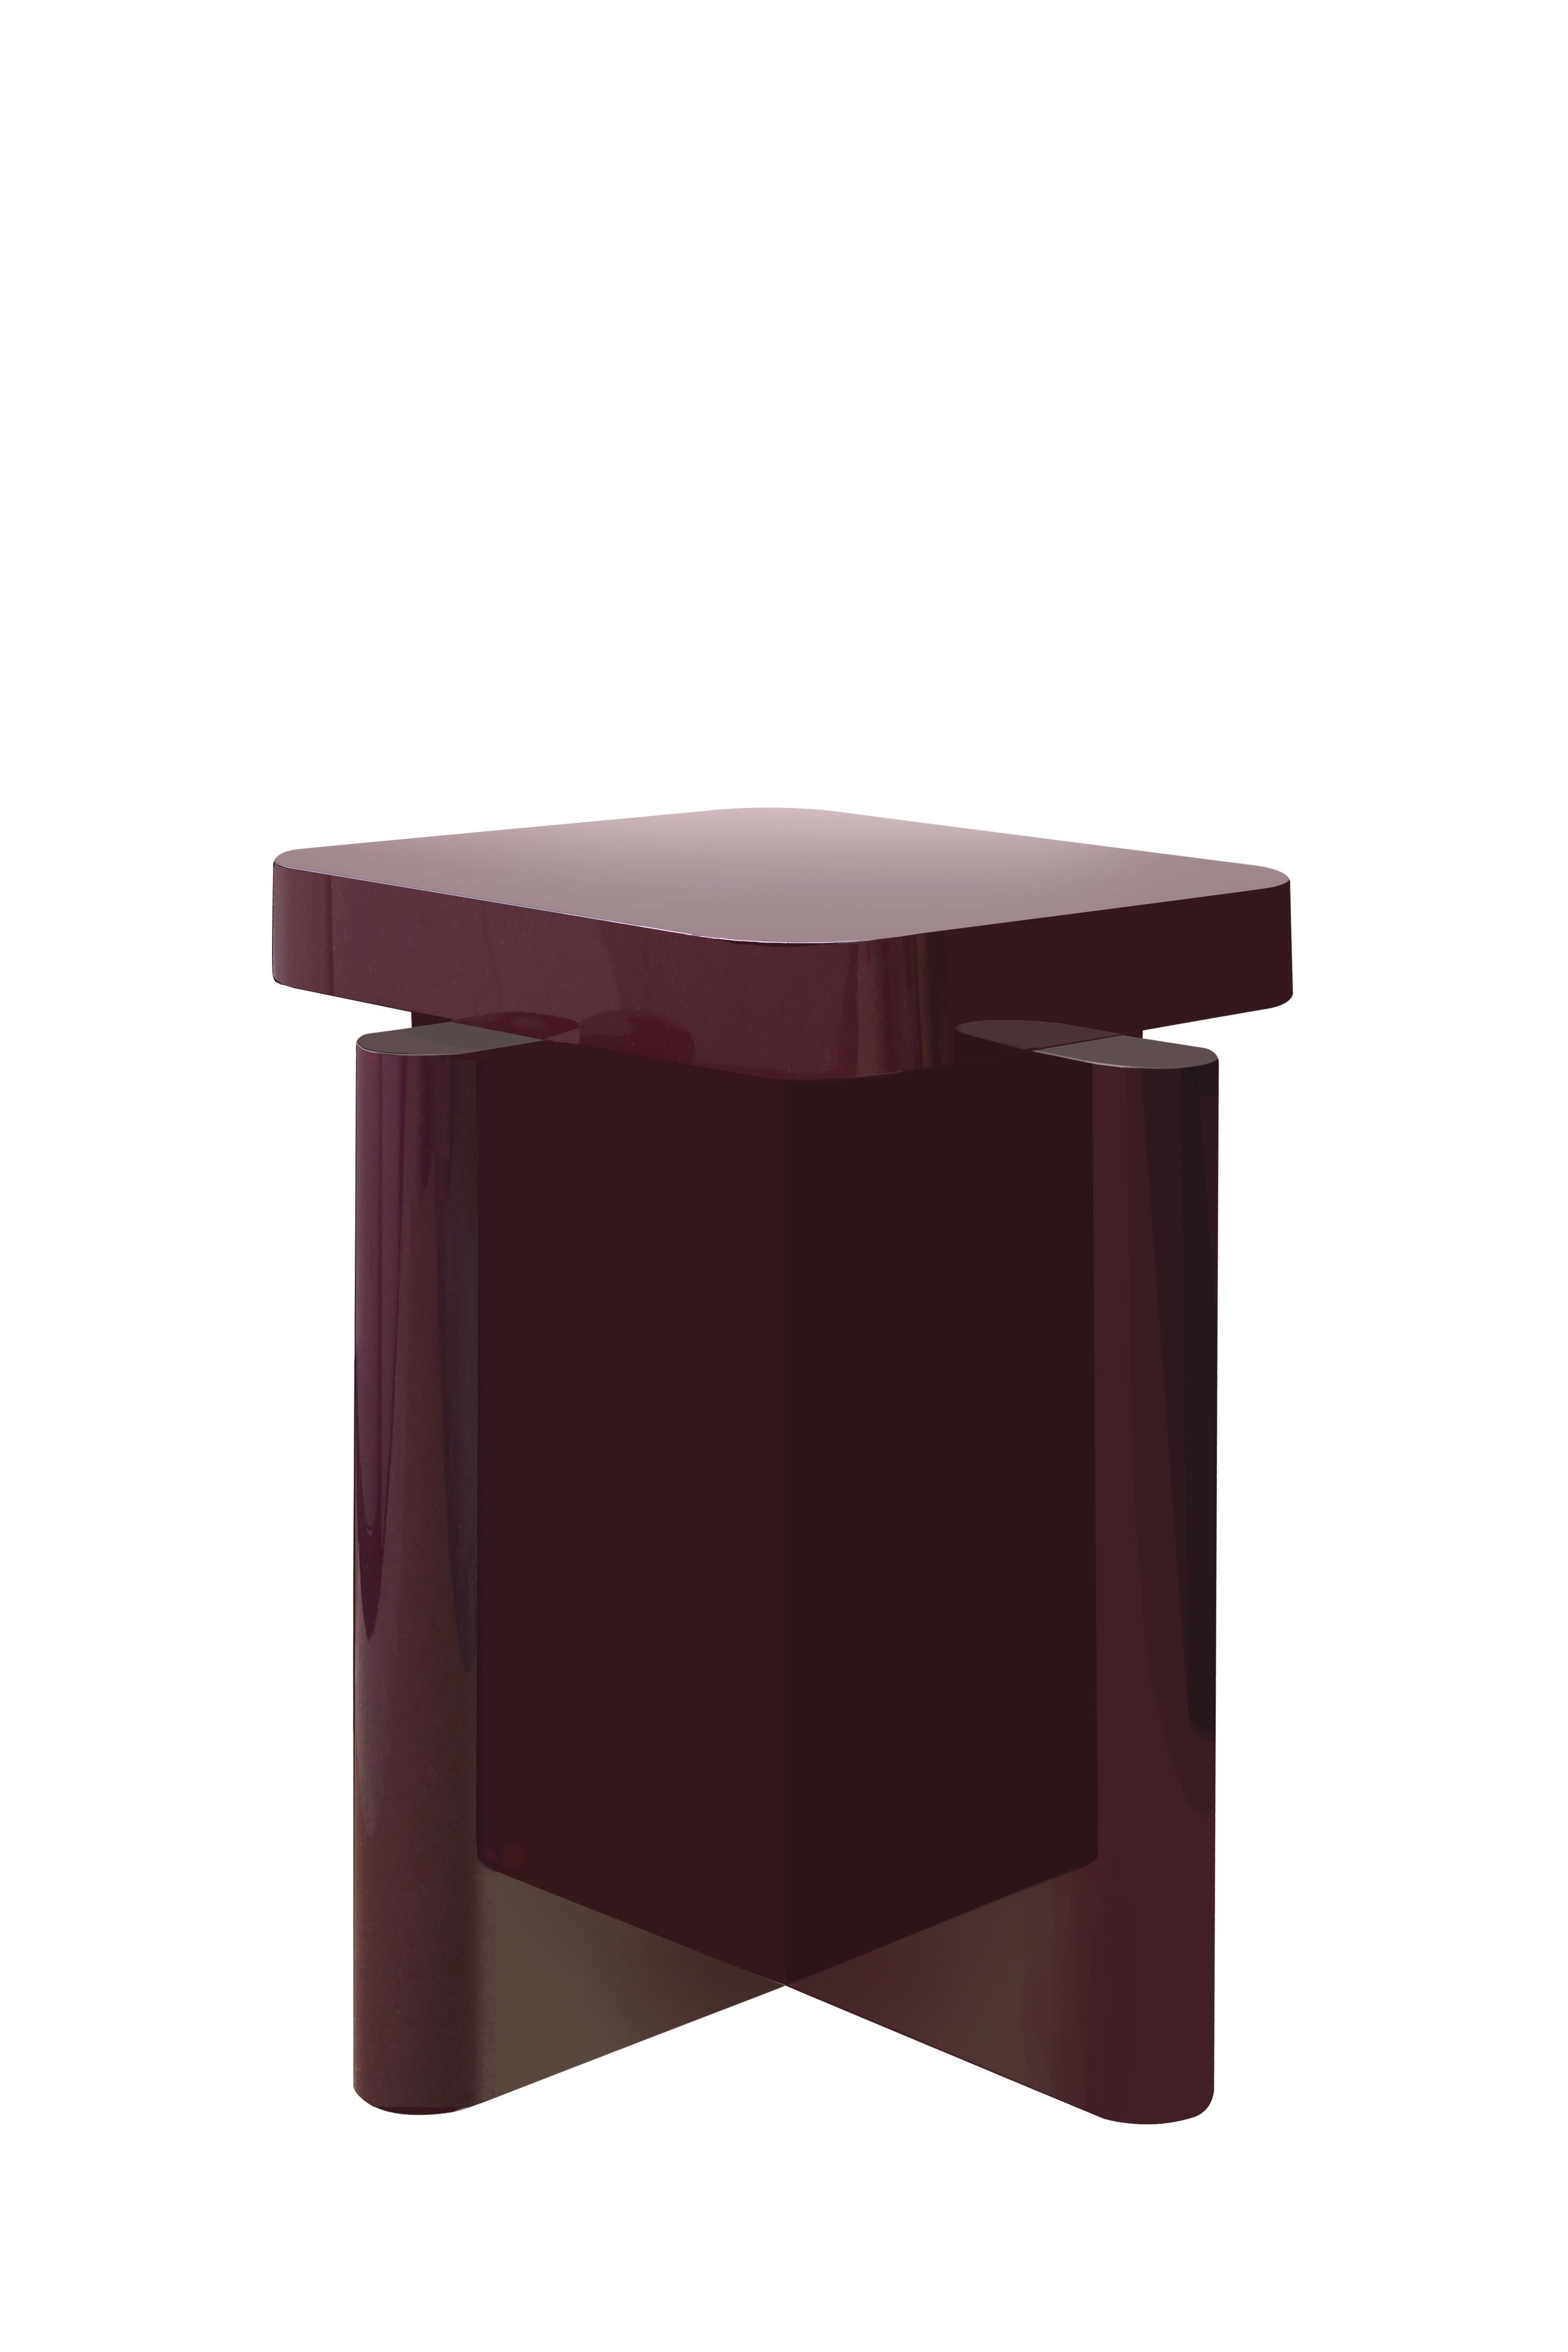 Modern Spina Table in Lac Wood Bordeaux 1 Edit by Portego For Sale